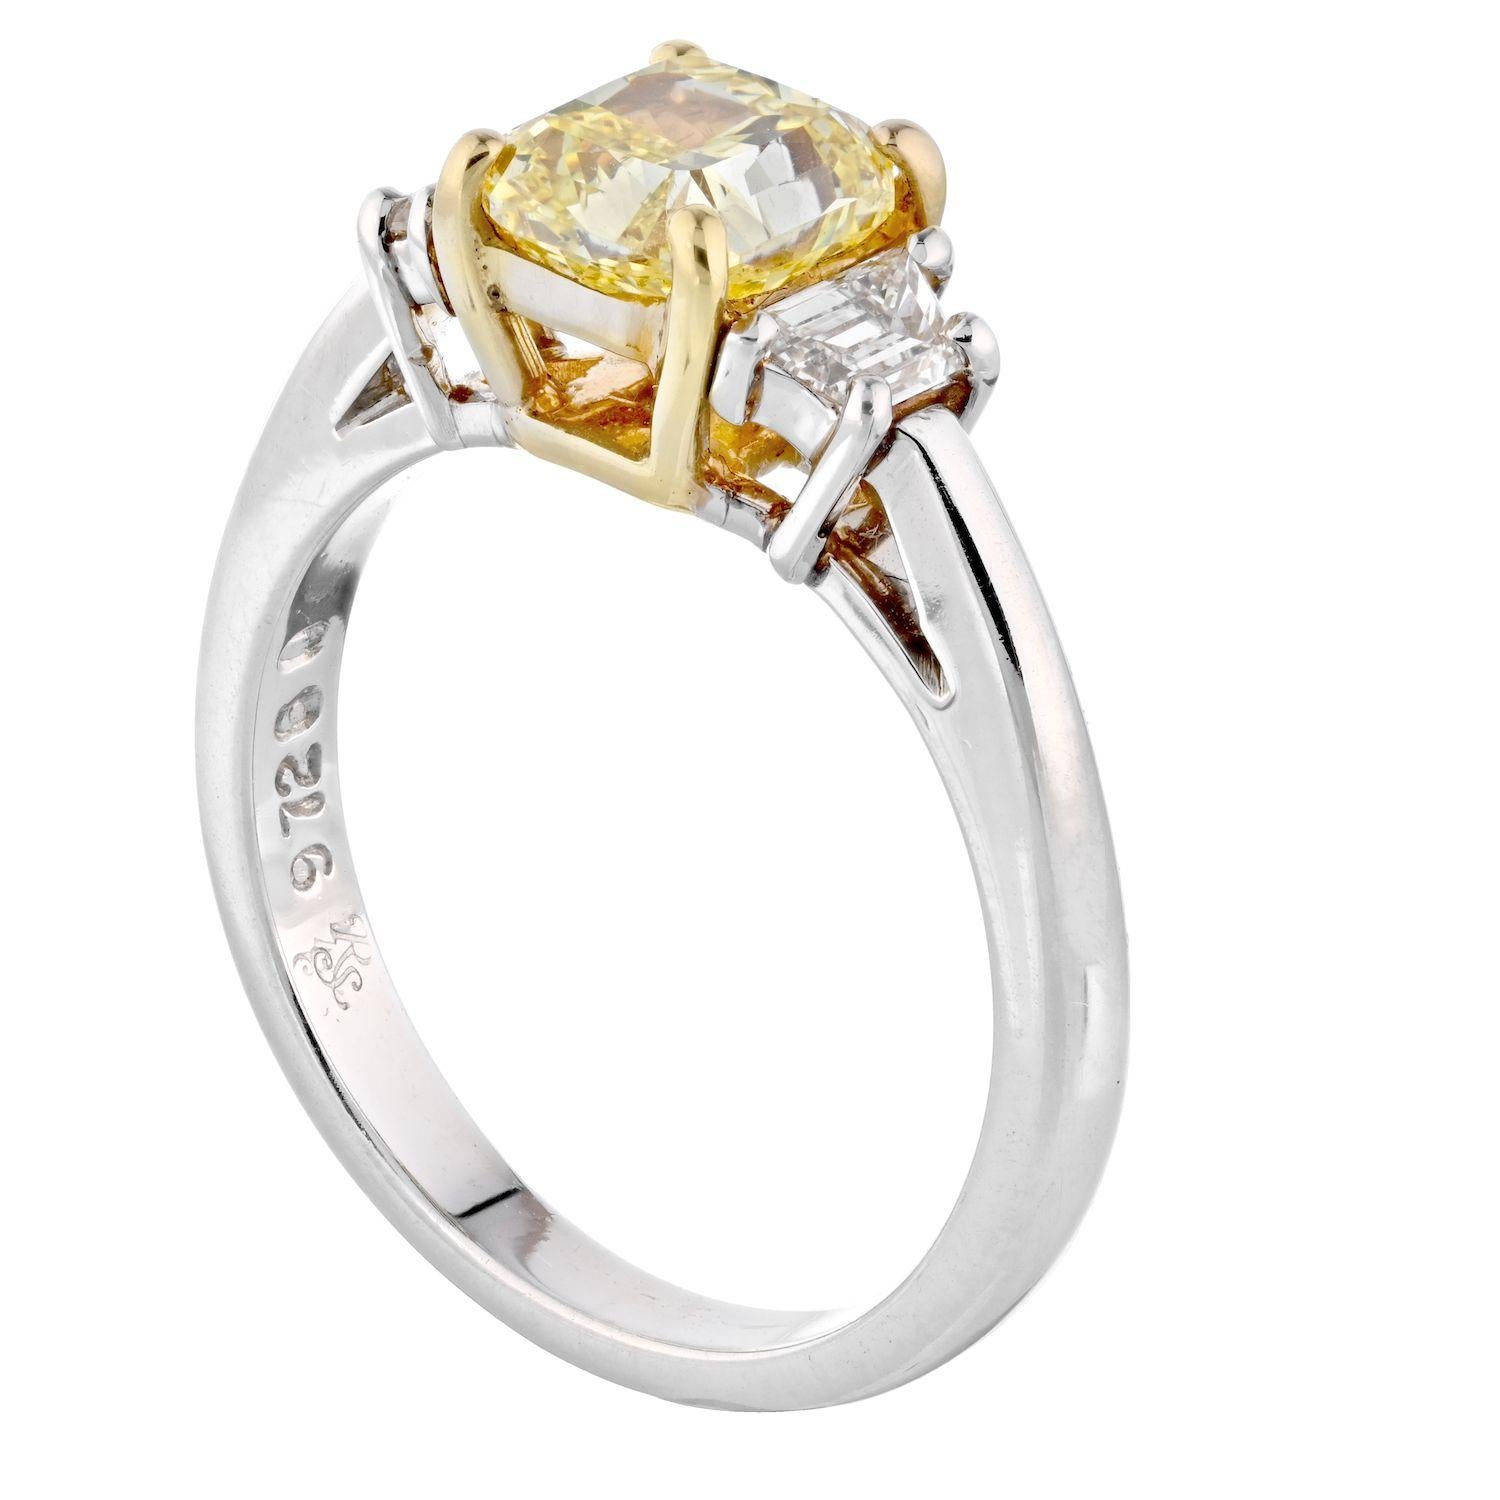 Very elegant and stylish this is a radiant cut fancy yellow diamond engagement ring. Structured as a three stone diamond ring this beautiful engagement ring features a center diamond of 1.51 carats that is a natural fancy yellow diamond. Best of all